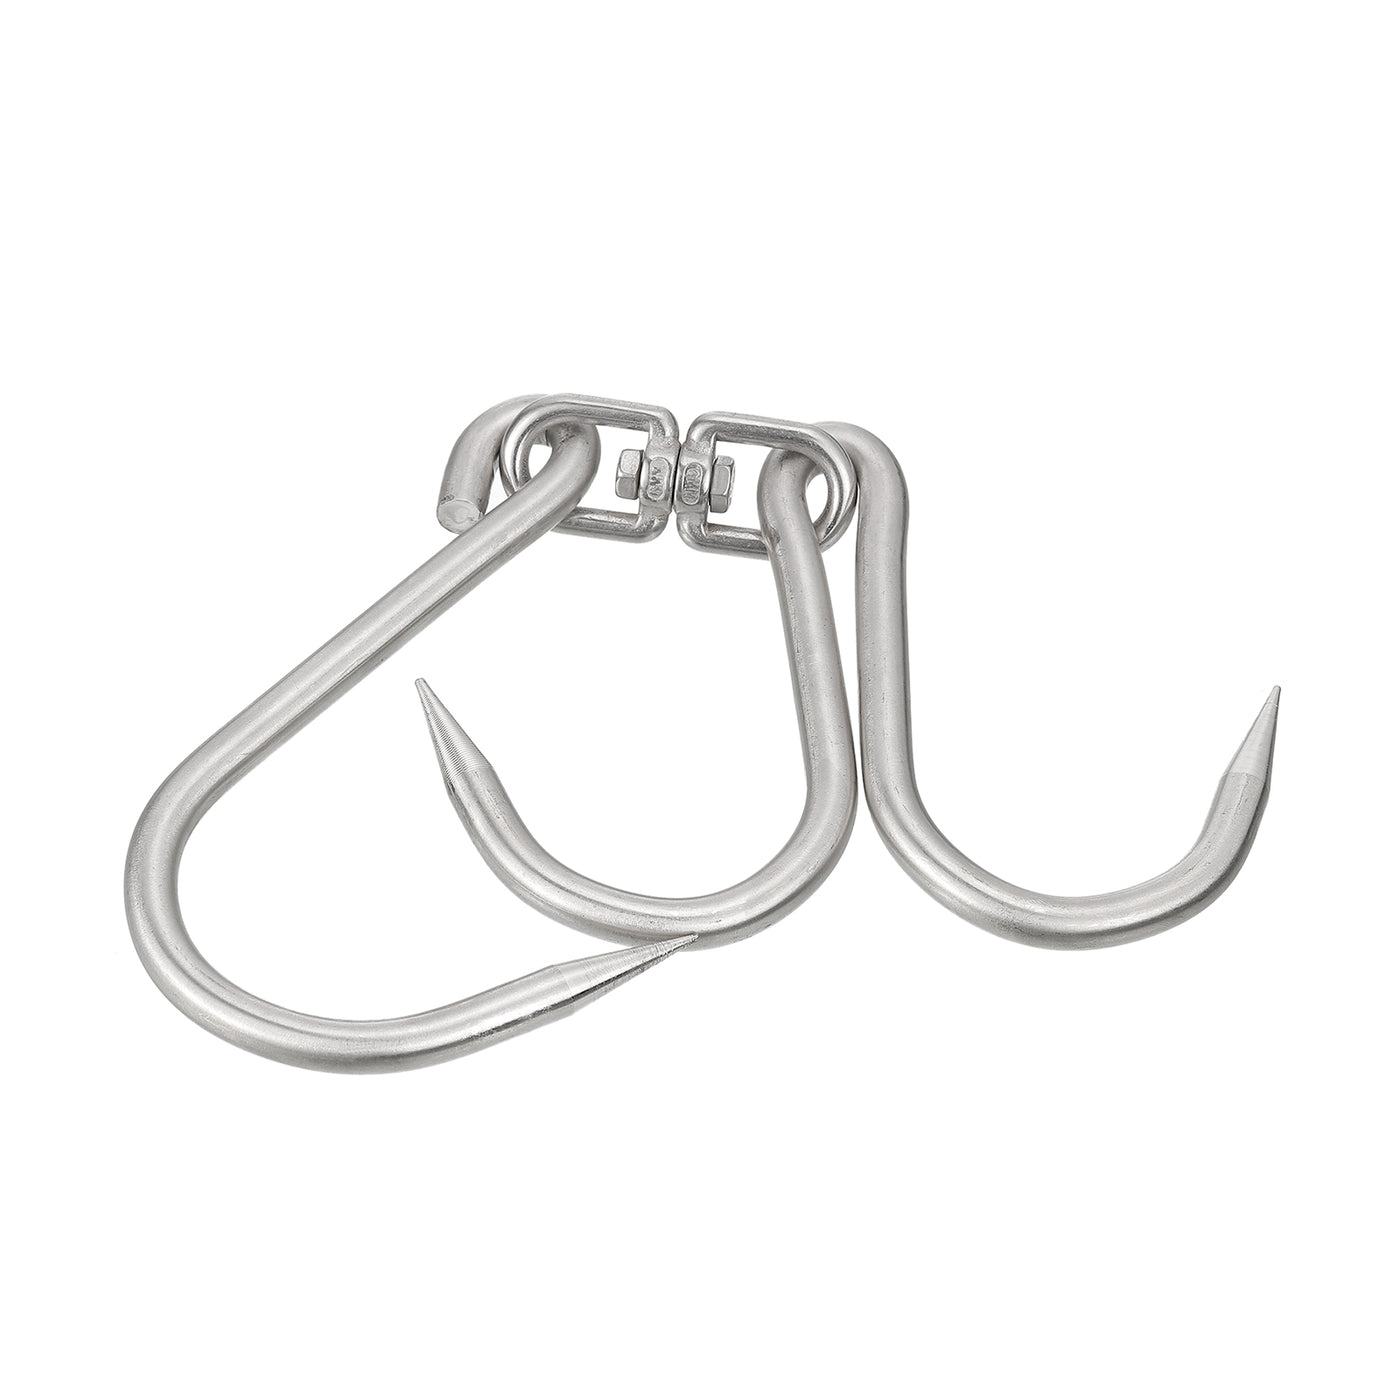 uxcell Uxcell 12.8'' Double Meat Hooks, 0.39'' Thickness Stainless Steel Swivel Meat Hook